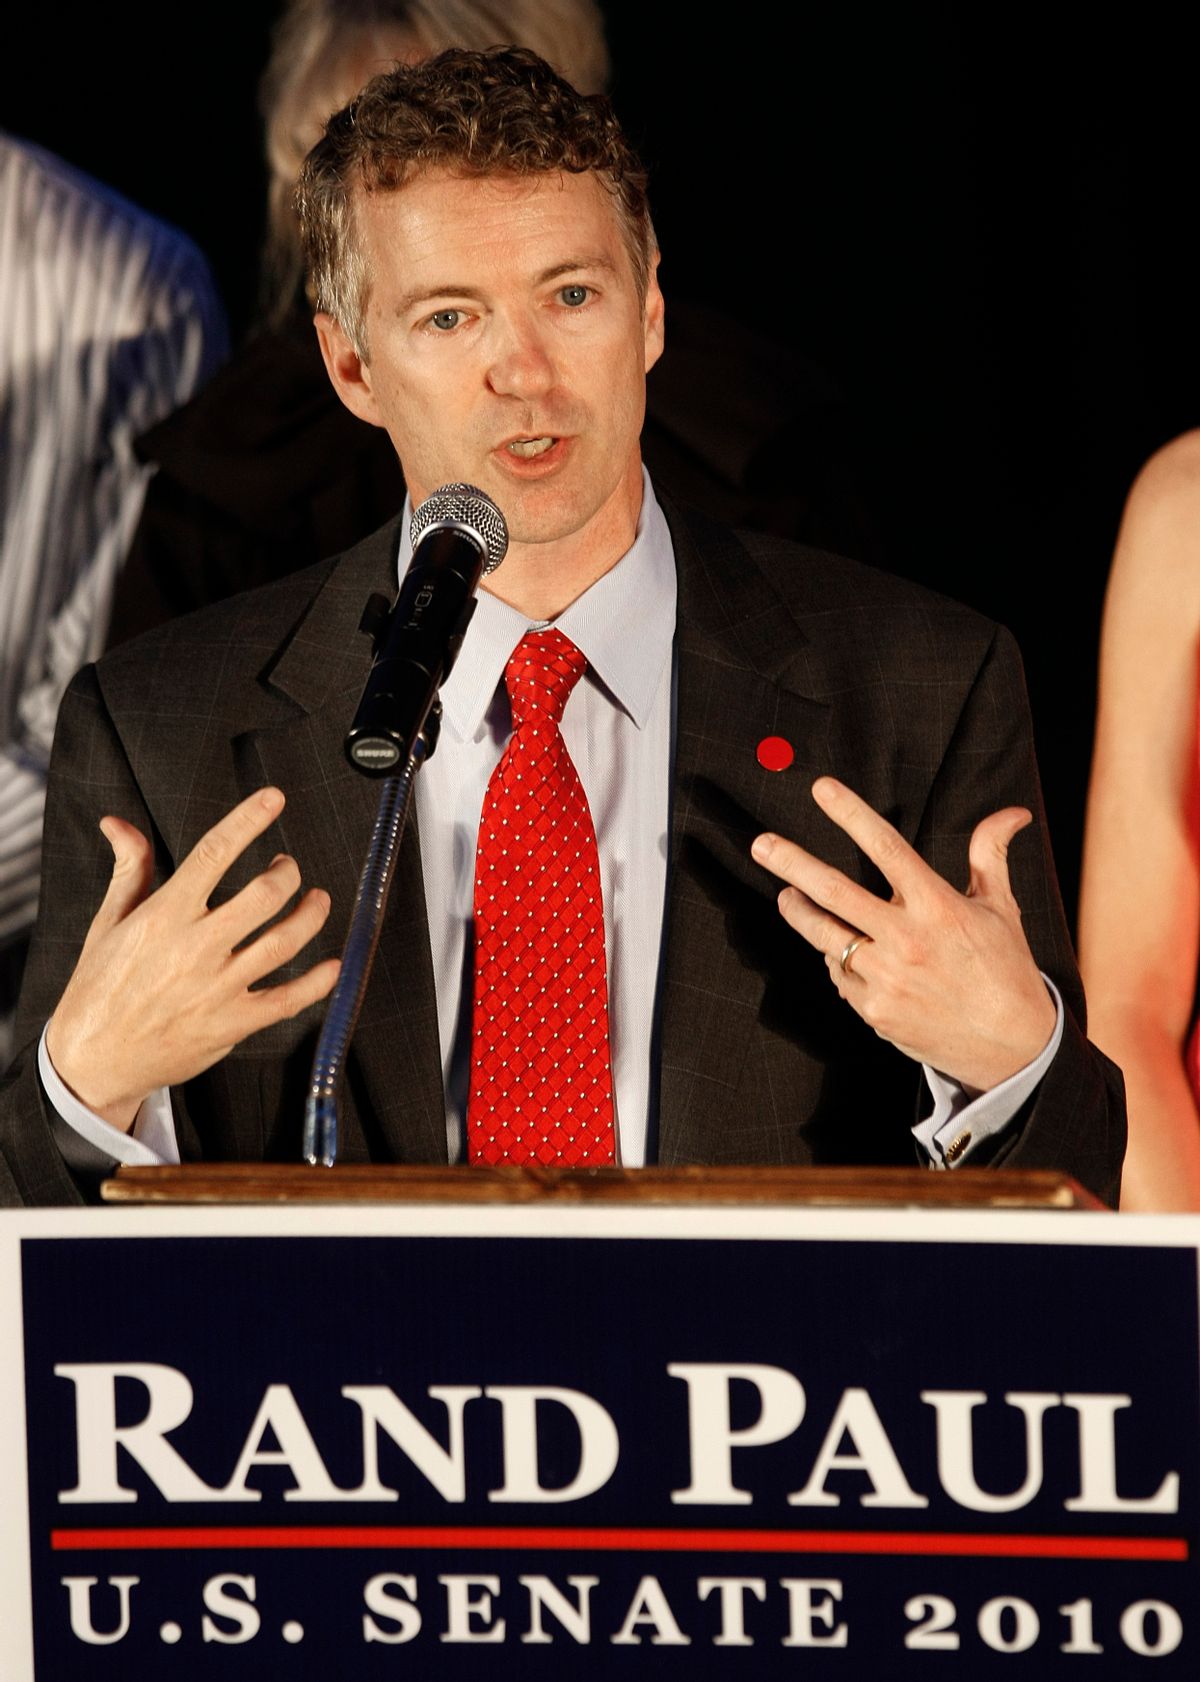 Republican U.S. Senate candidate Rand Paul addresses supporters at his victory celebration in Bowling Green, Ky., Tuesday, May 18, 2010.  (AP Photo/Ed Reinke) (Ed Reinke)